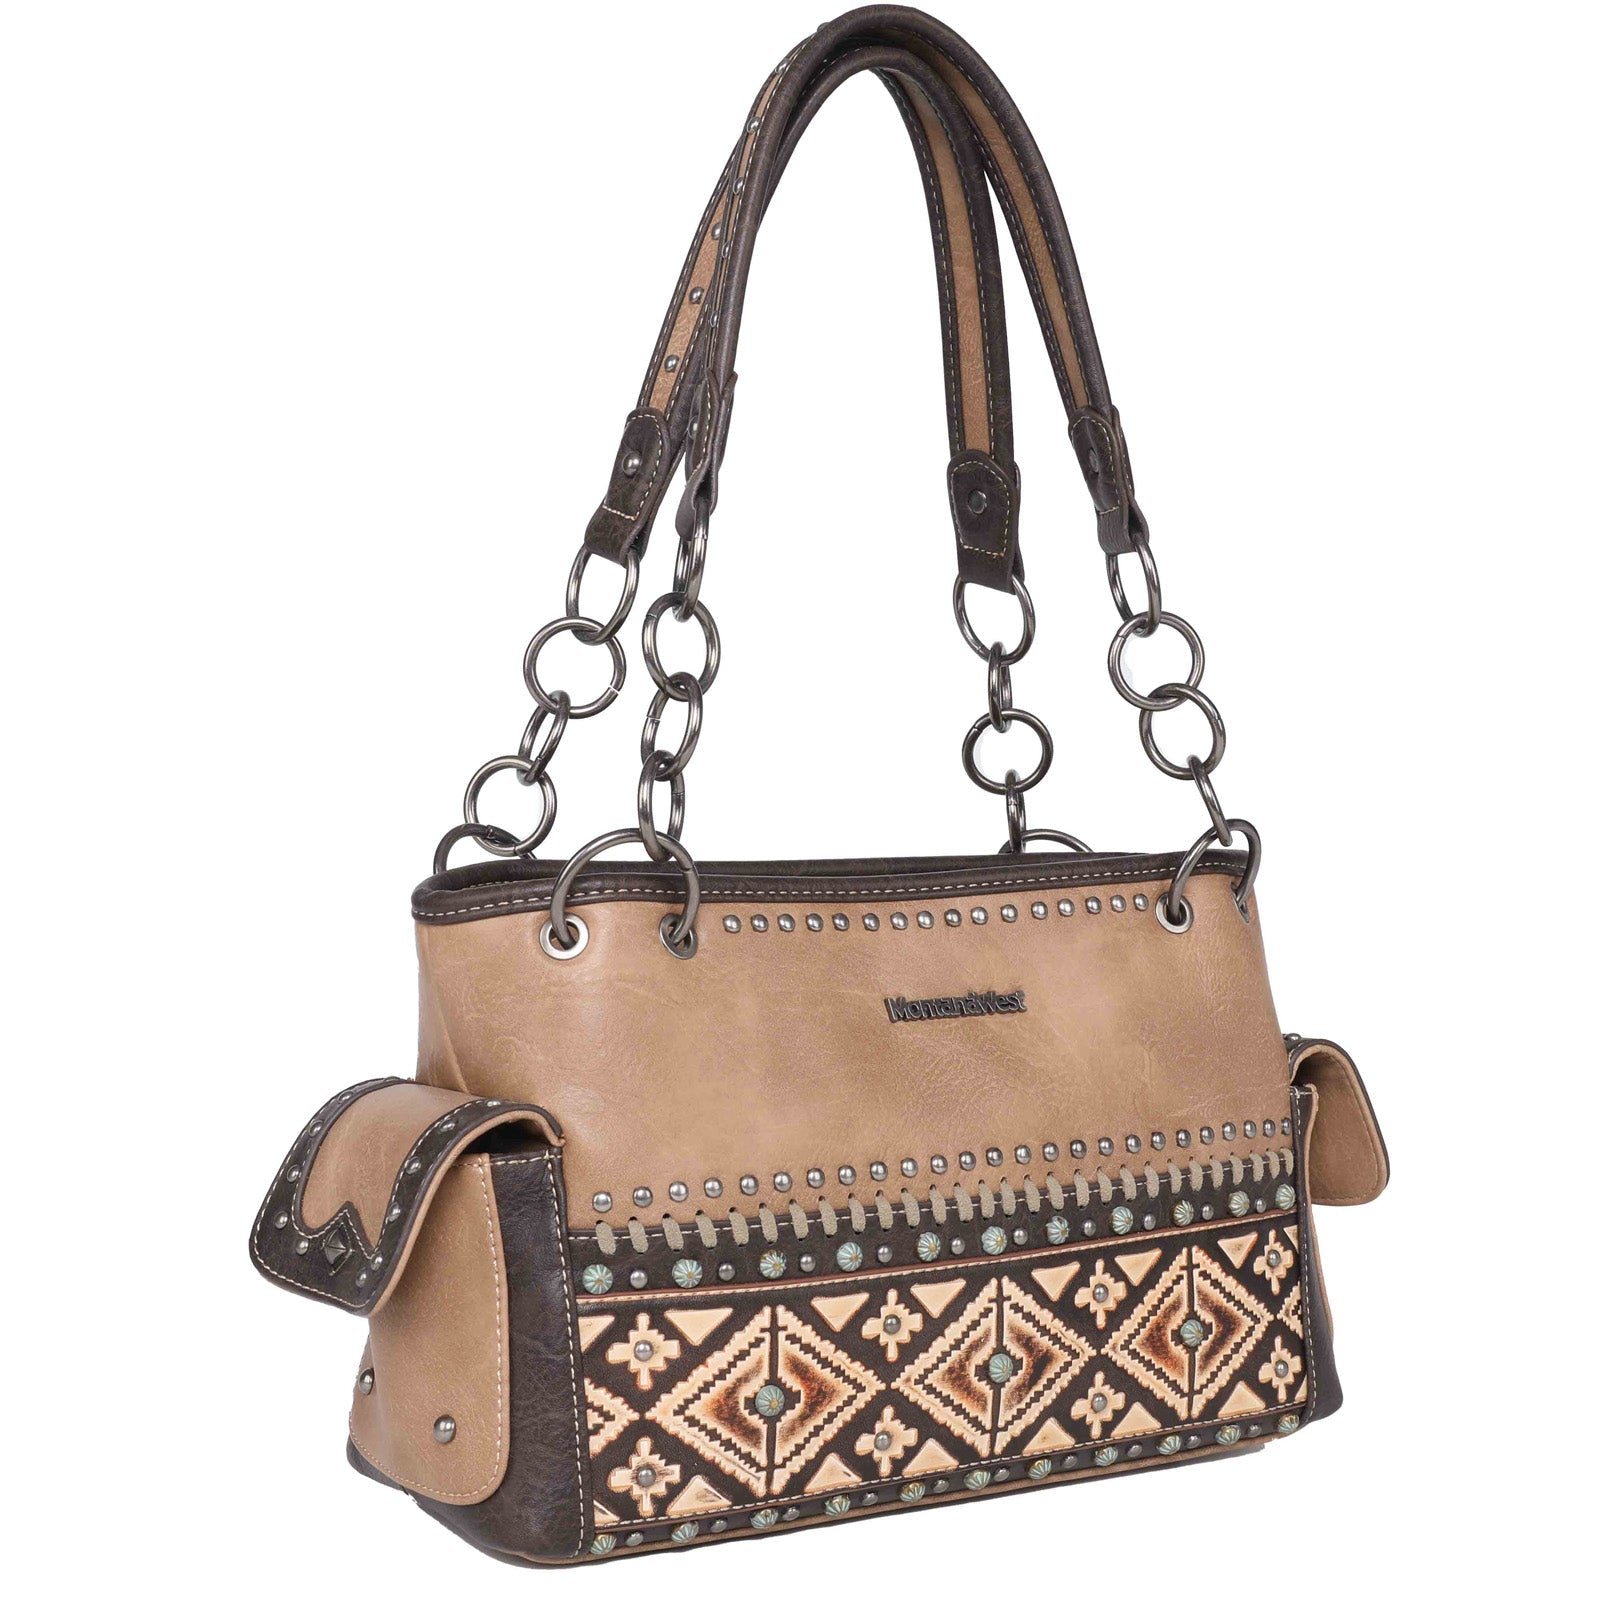 Montana West Aztec Tooled Collection Concealed Carry Satchel - Cowgirl Wear